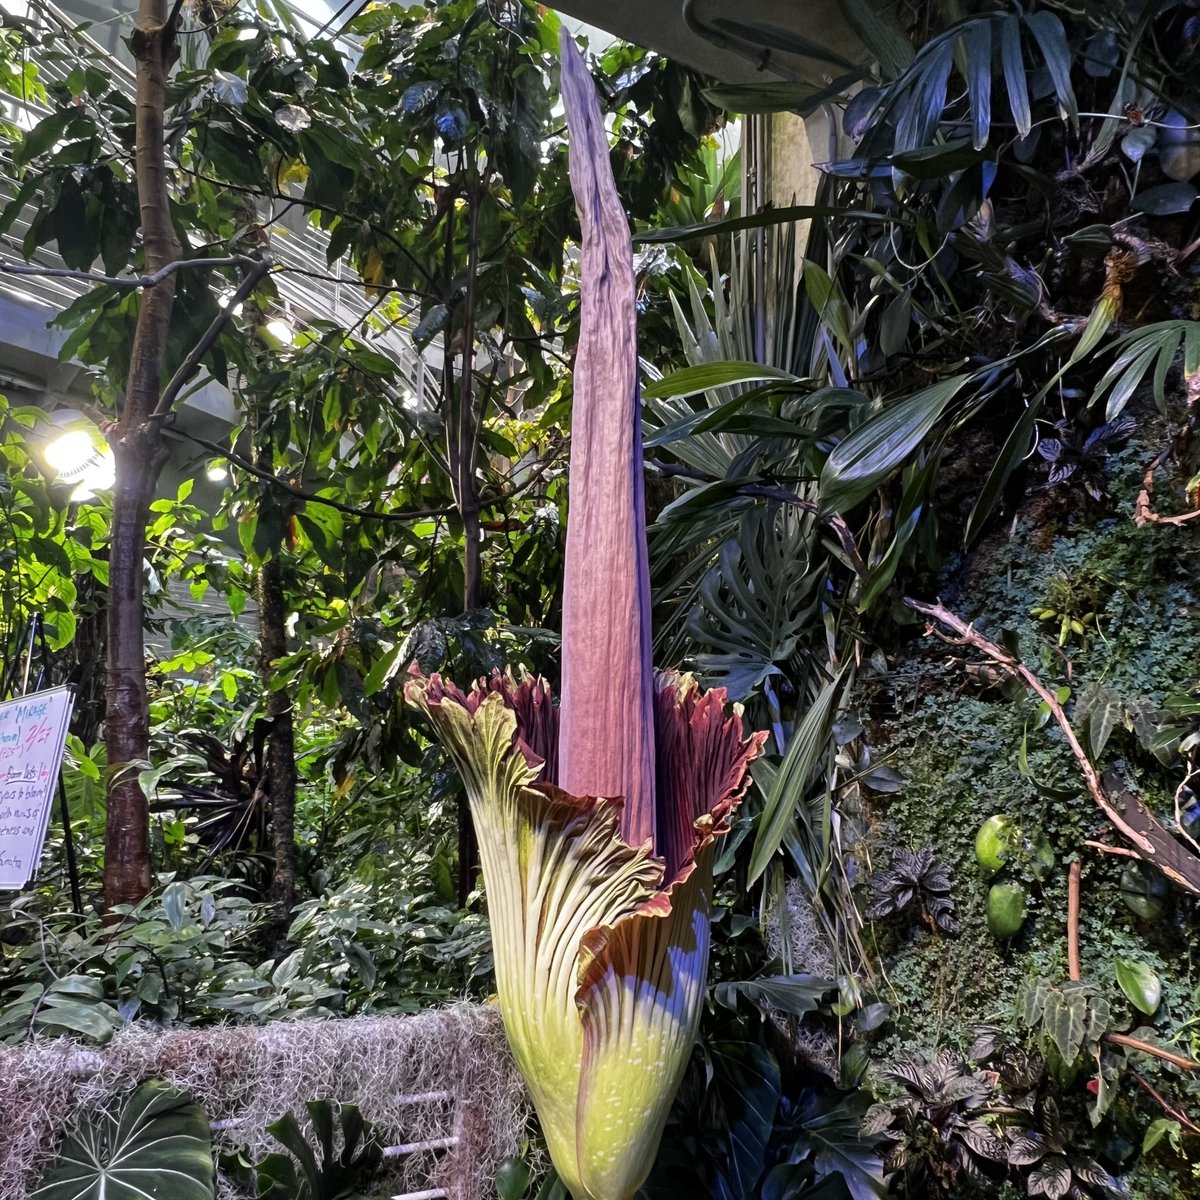 It’s happening! Mirage, our corpse flower, is blooming. Tune in to an after-hours corpse flower Q&A livestream with Academy biologist Tim Wong at 5:30PM PST here: bit.ly/4bQ9ZkD The Osher Rainforest opens tomorrow at 10:00AM, come catch a whiff!